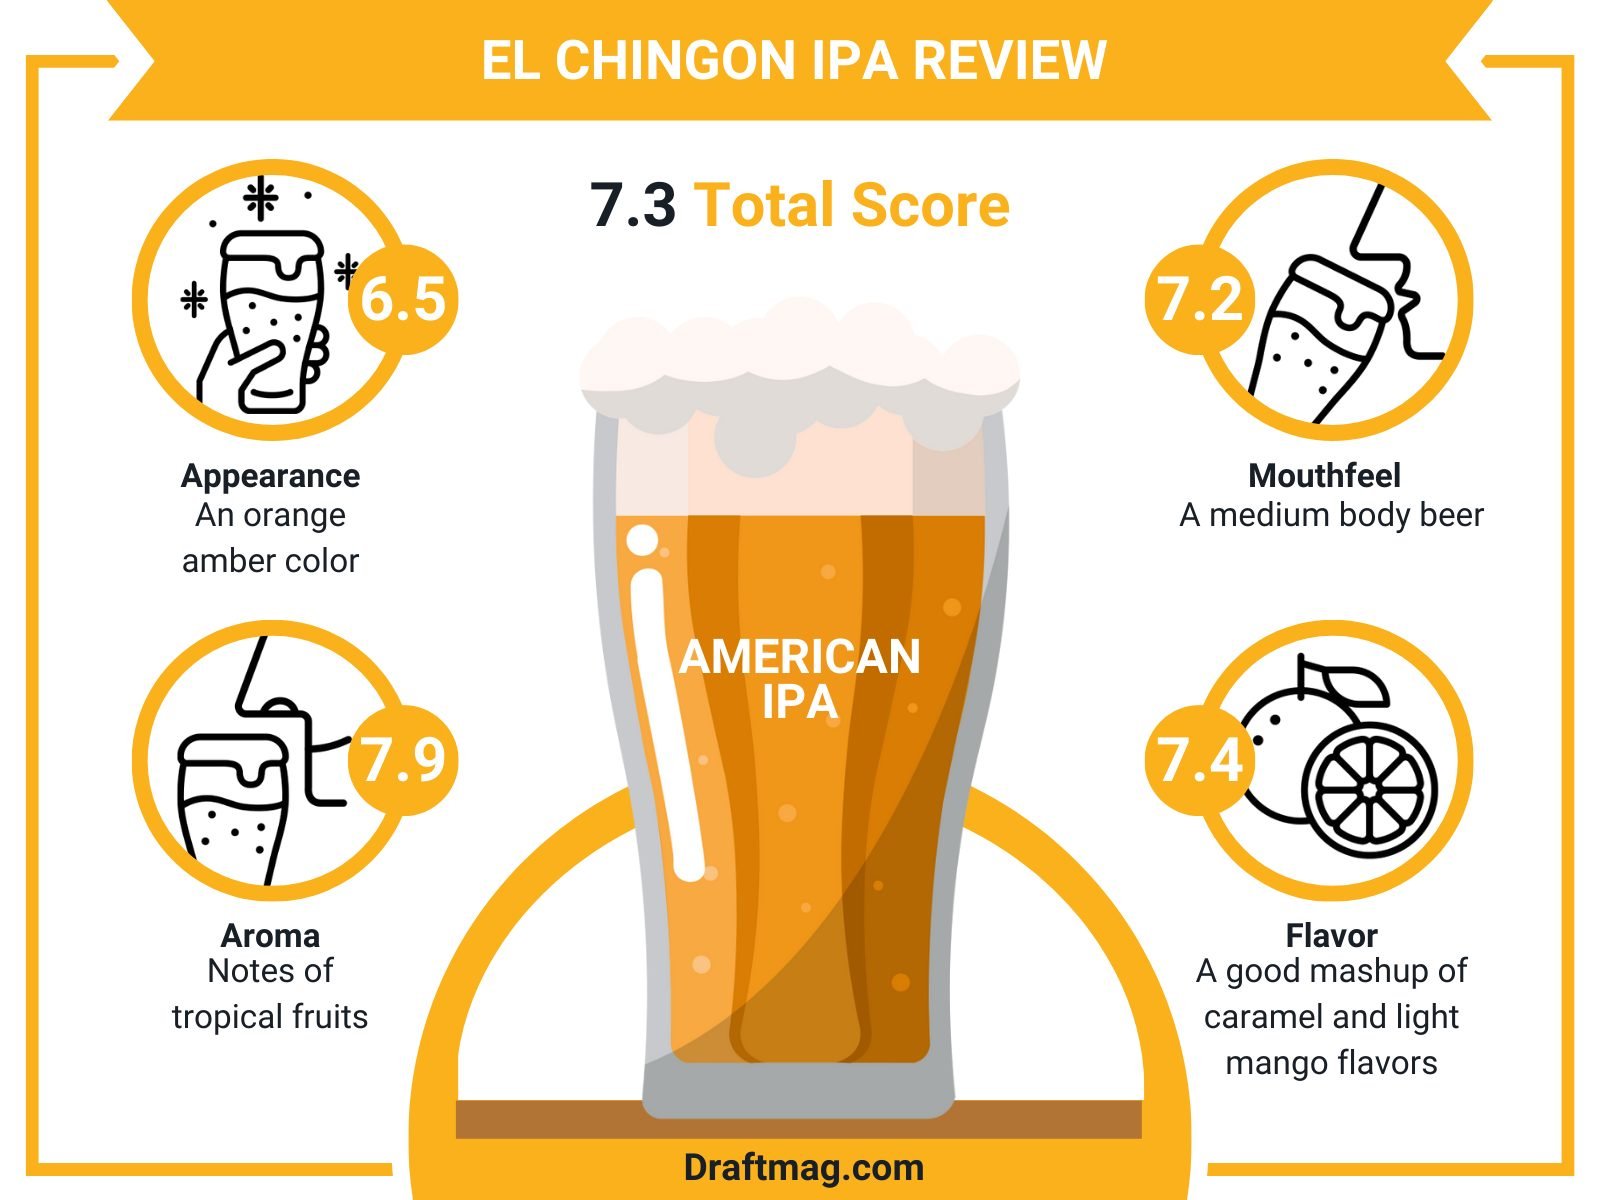 El Chingon Ipa Review Infographic